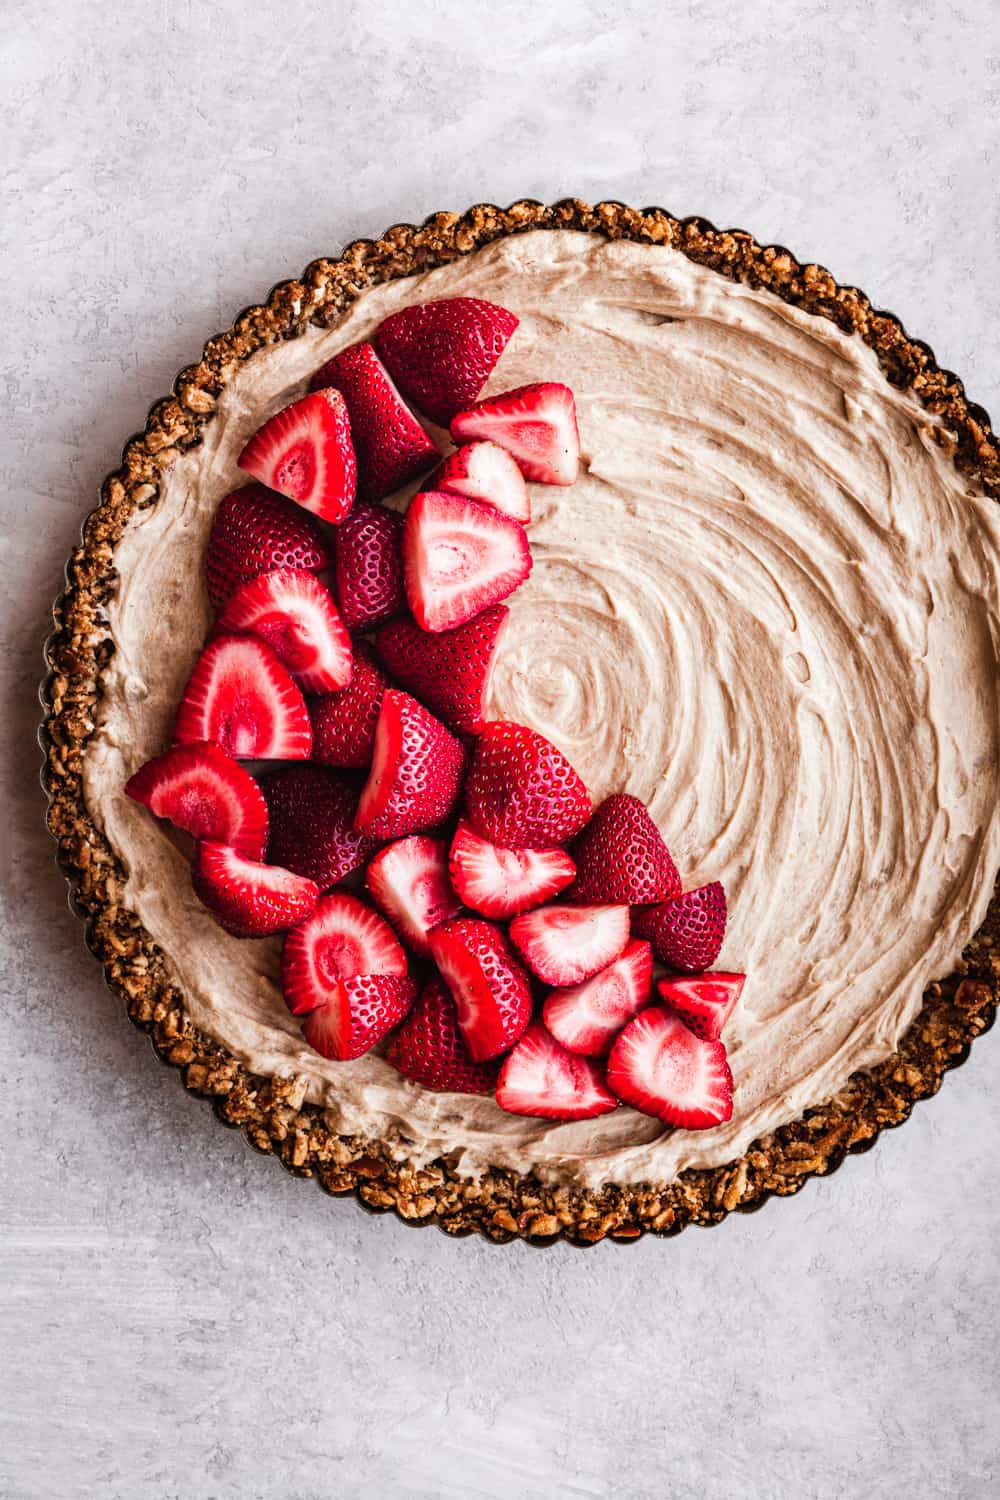 No-Bake Mascarpone Cheesecake with mascarpone, a pretzel crust, and topped with fresh strawberries. Overhead shot on a white background.